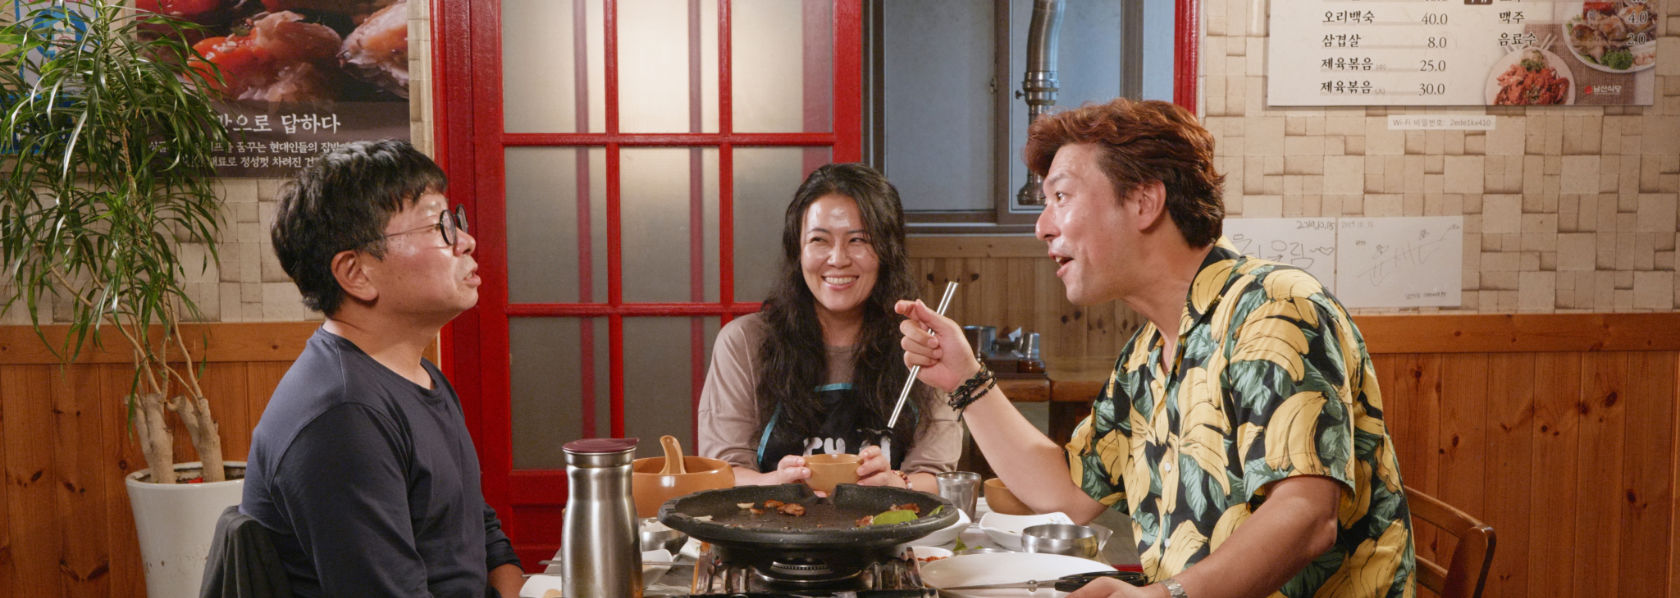 I LEAVE HOME - Two friends having dinner with restaurant owner - THIS Buddhist Film Festival